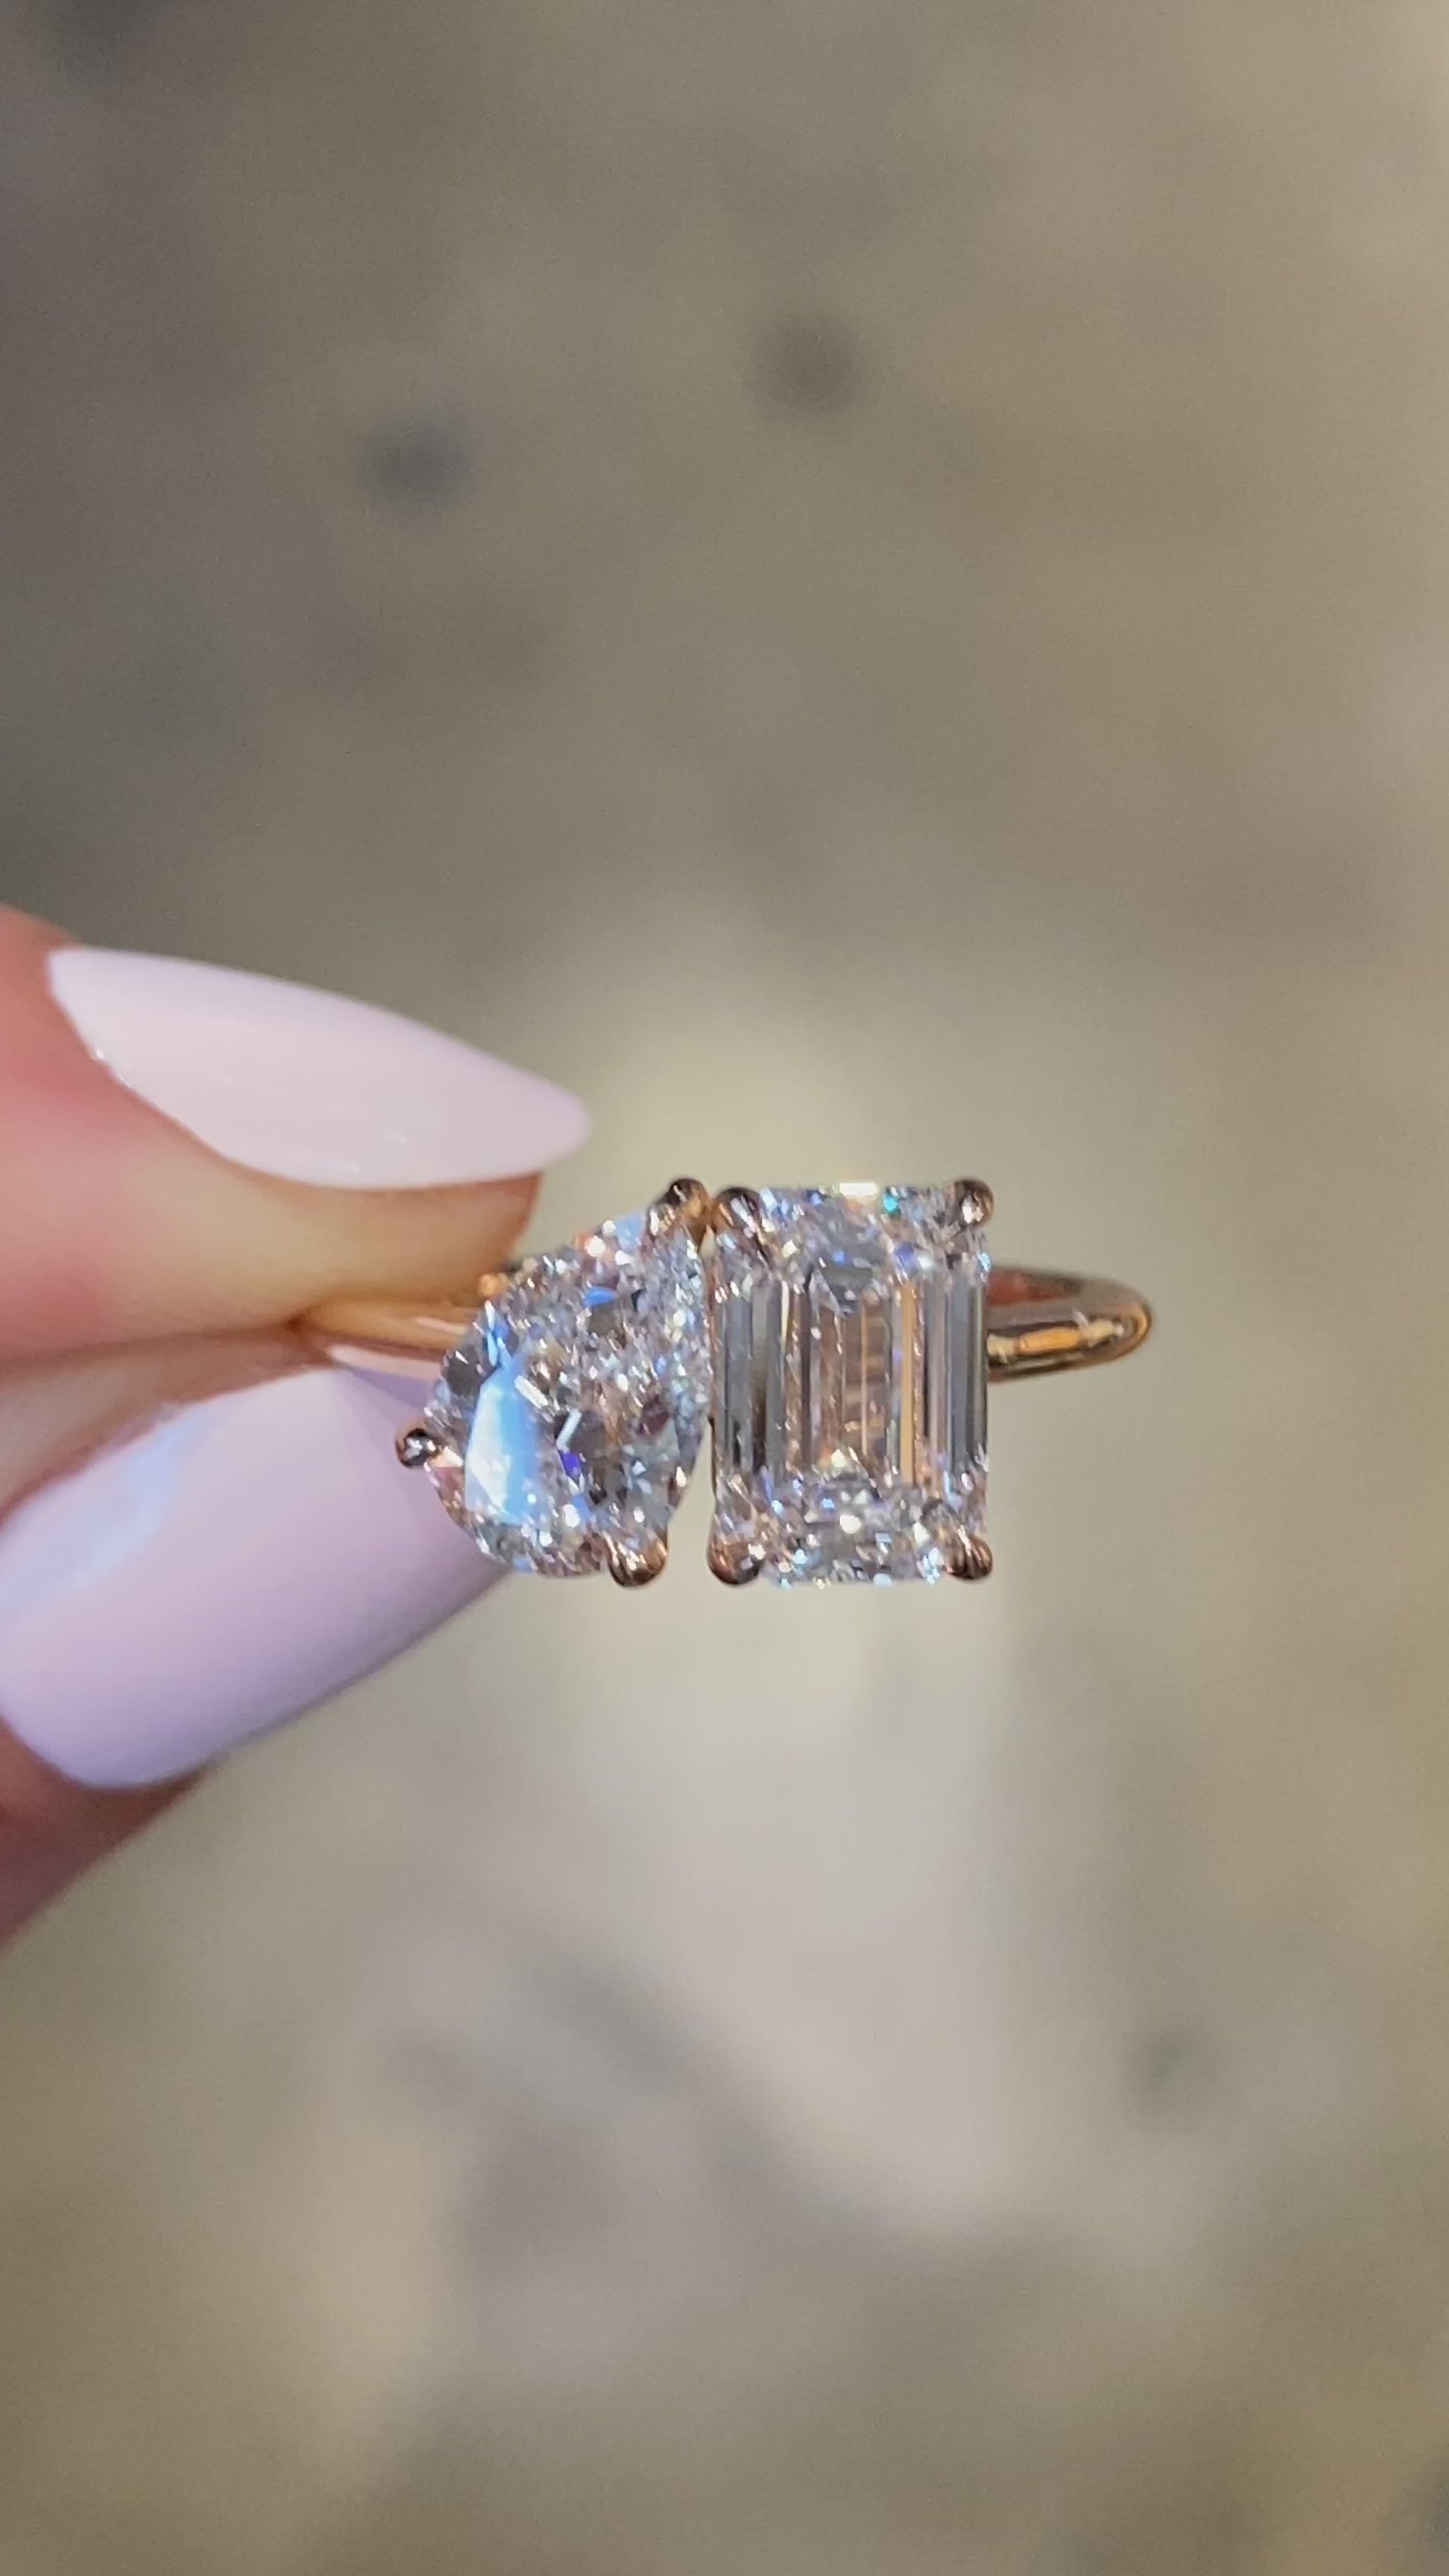 caption:Shown with 0.9ct pear and 1.5ct emerald cut diamond